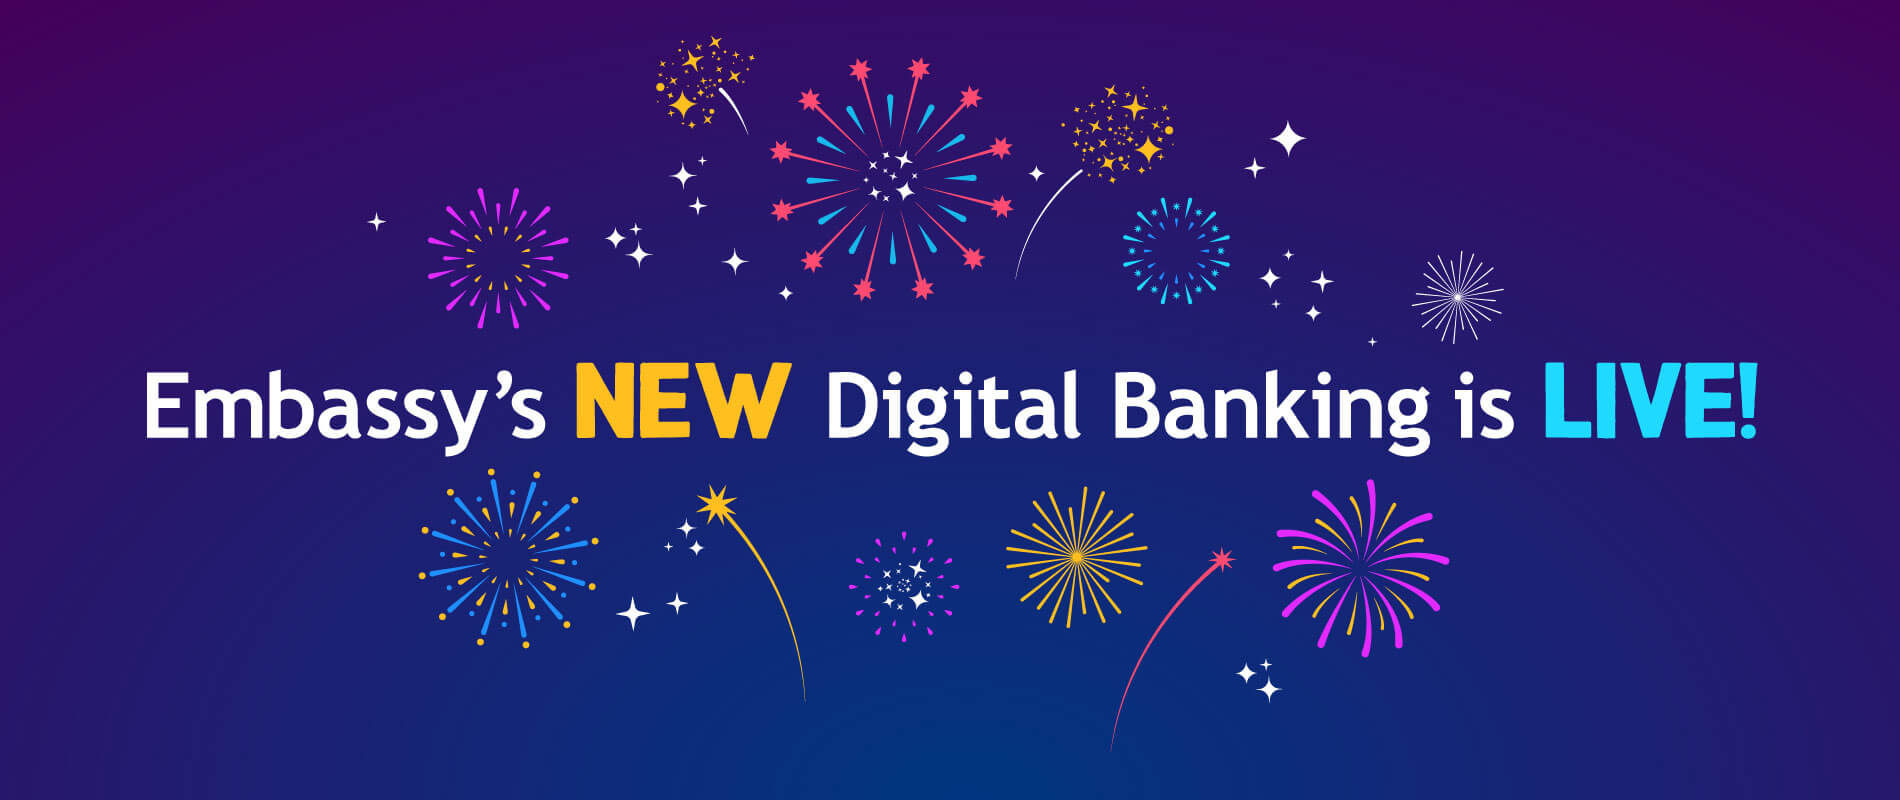 Your NEW Digital Banking Experience is LIVE!